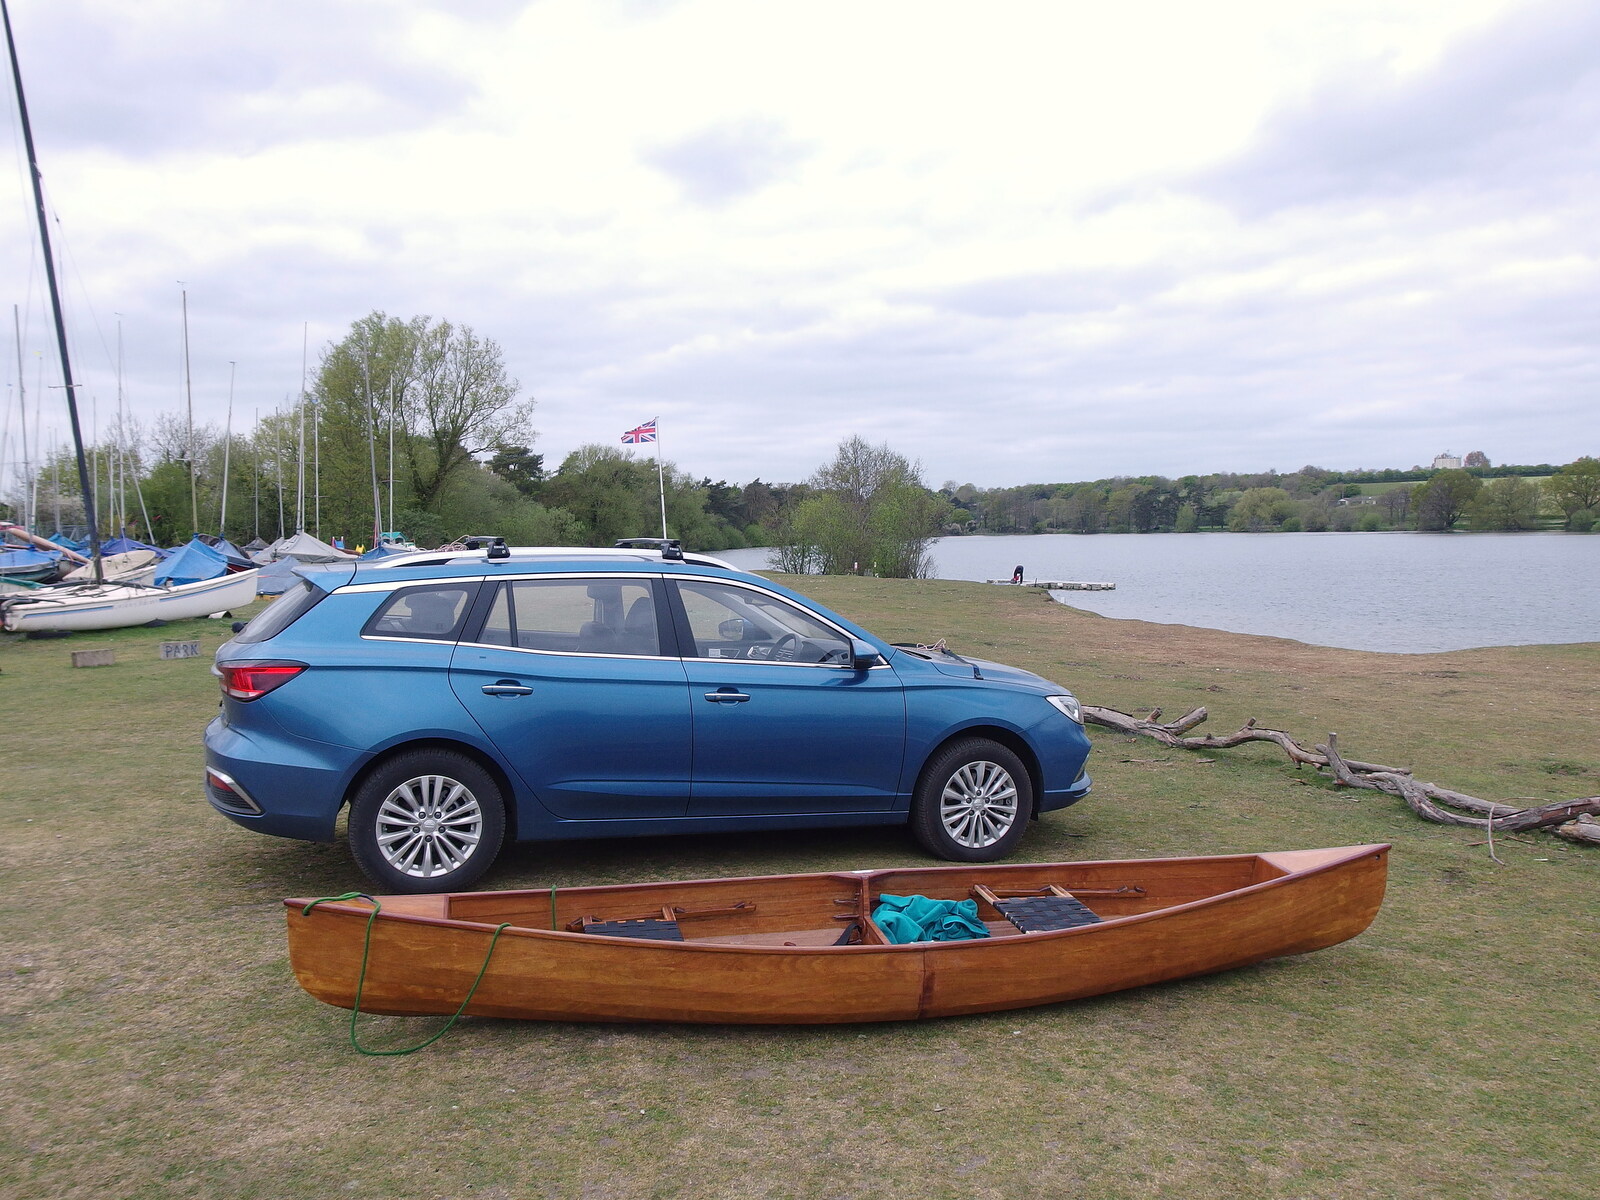 The Canoe's First Outing, Weybread Lake, Harleston - 1st May 2022: At the boat club for a test paddle around